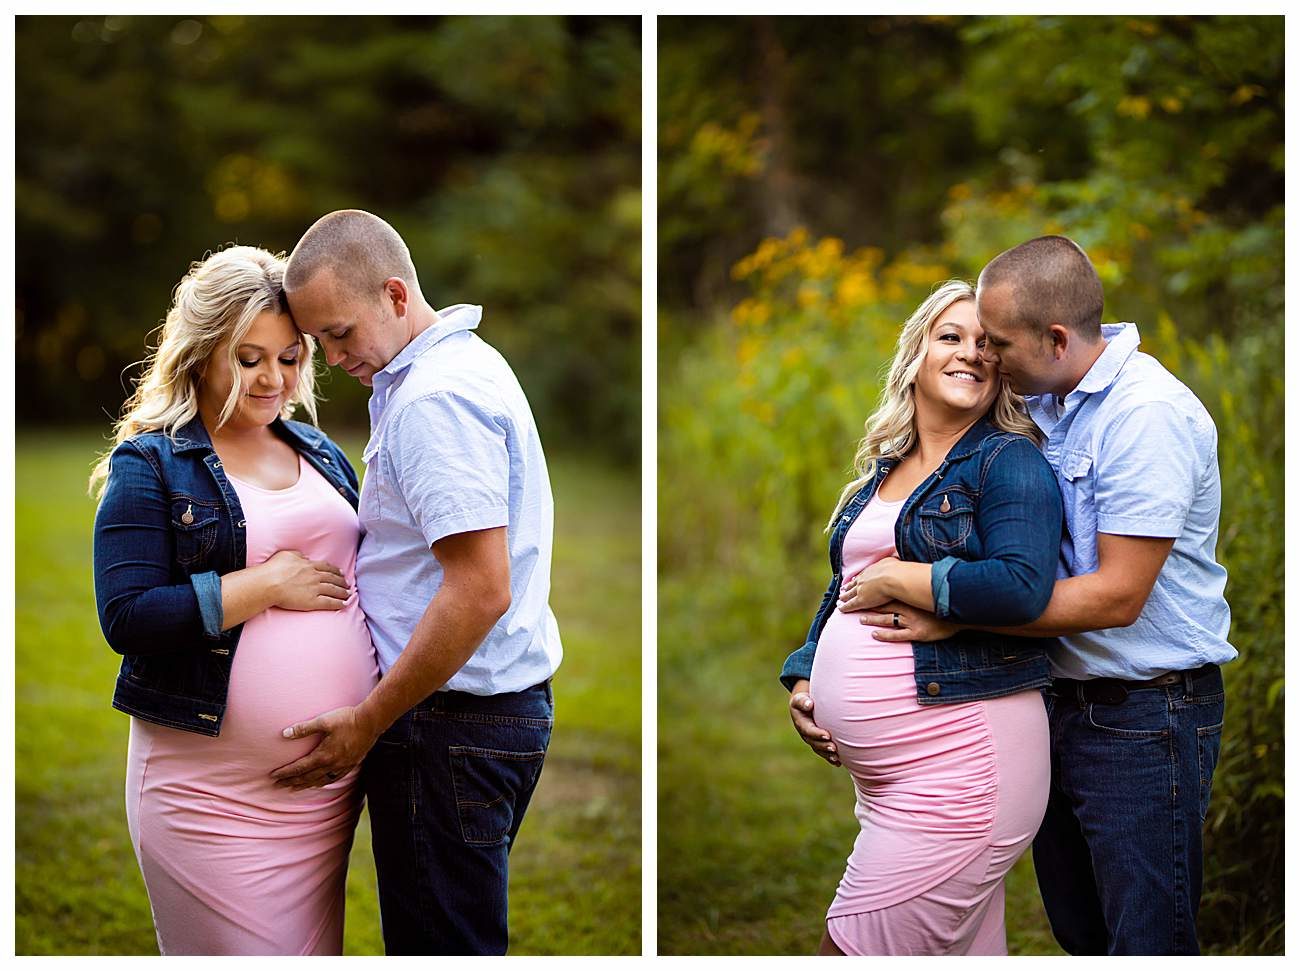 country greenery backdrop maternity session